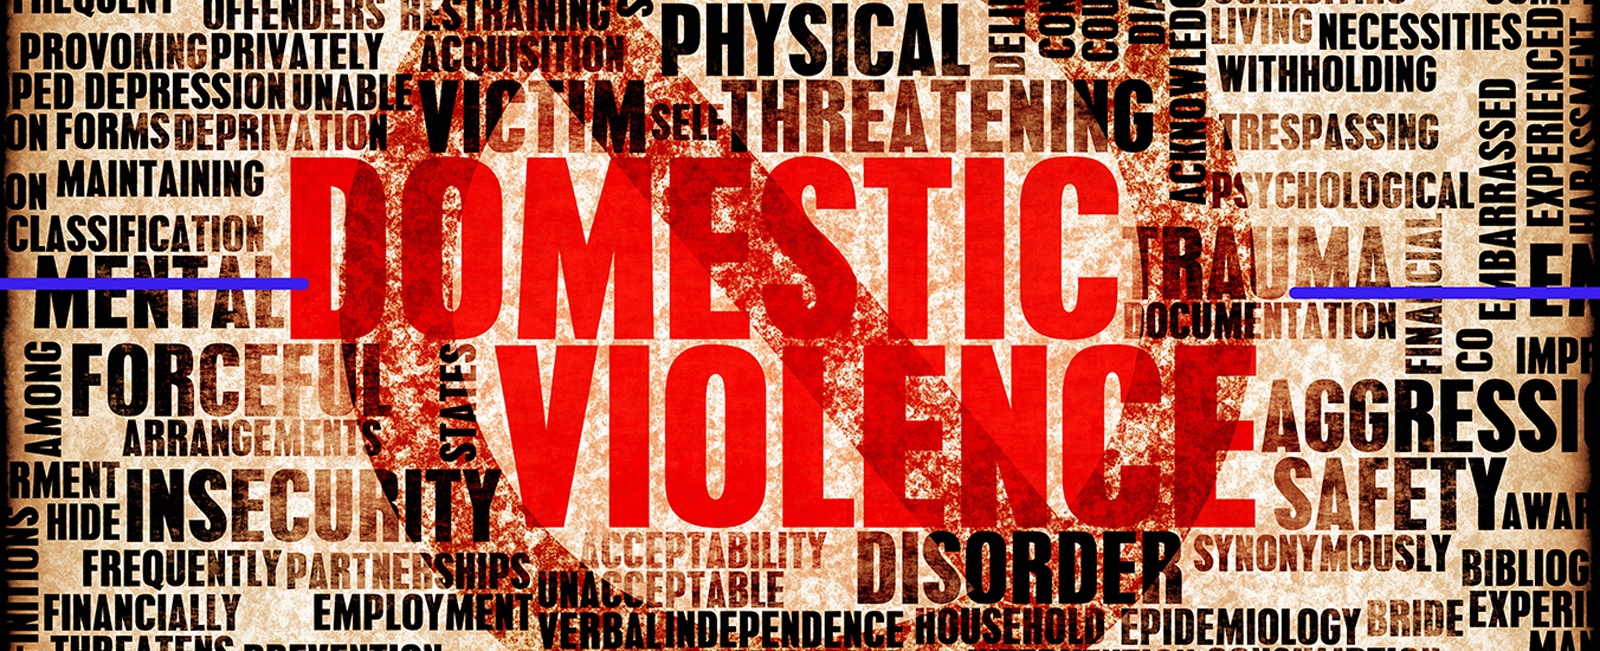 Westchester County Domestic Violence Support Services